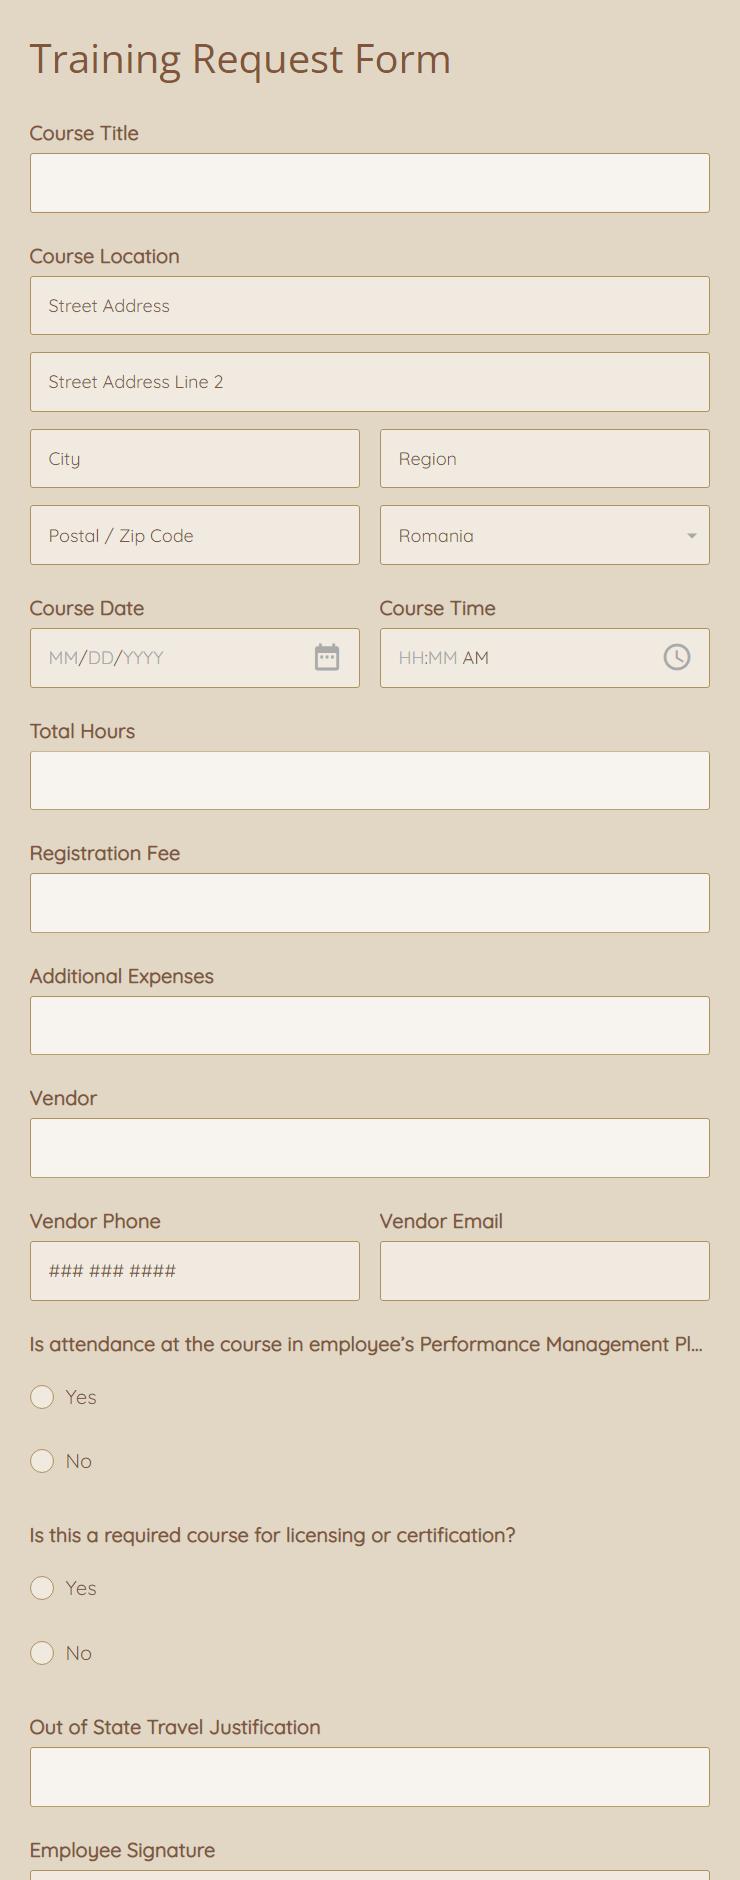 training-request-form-template-123-form-builder